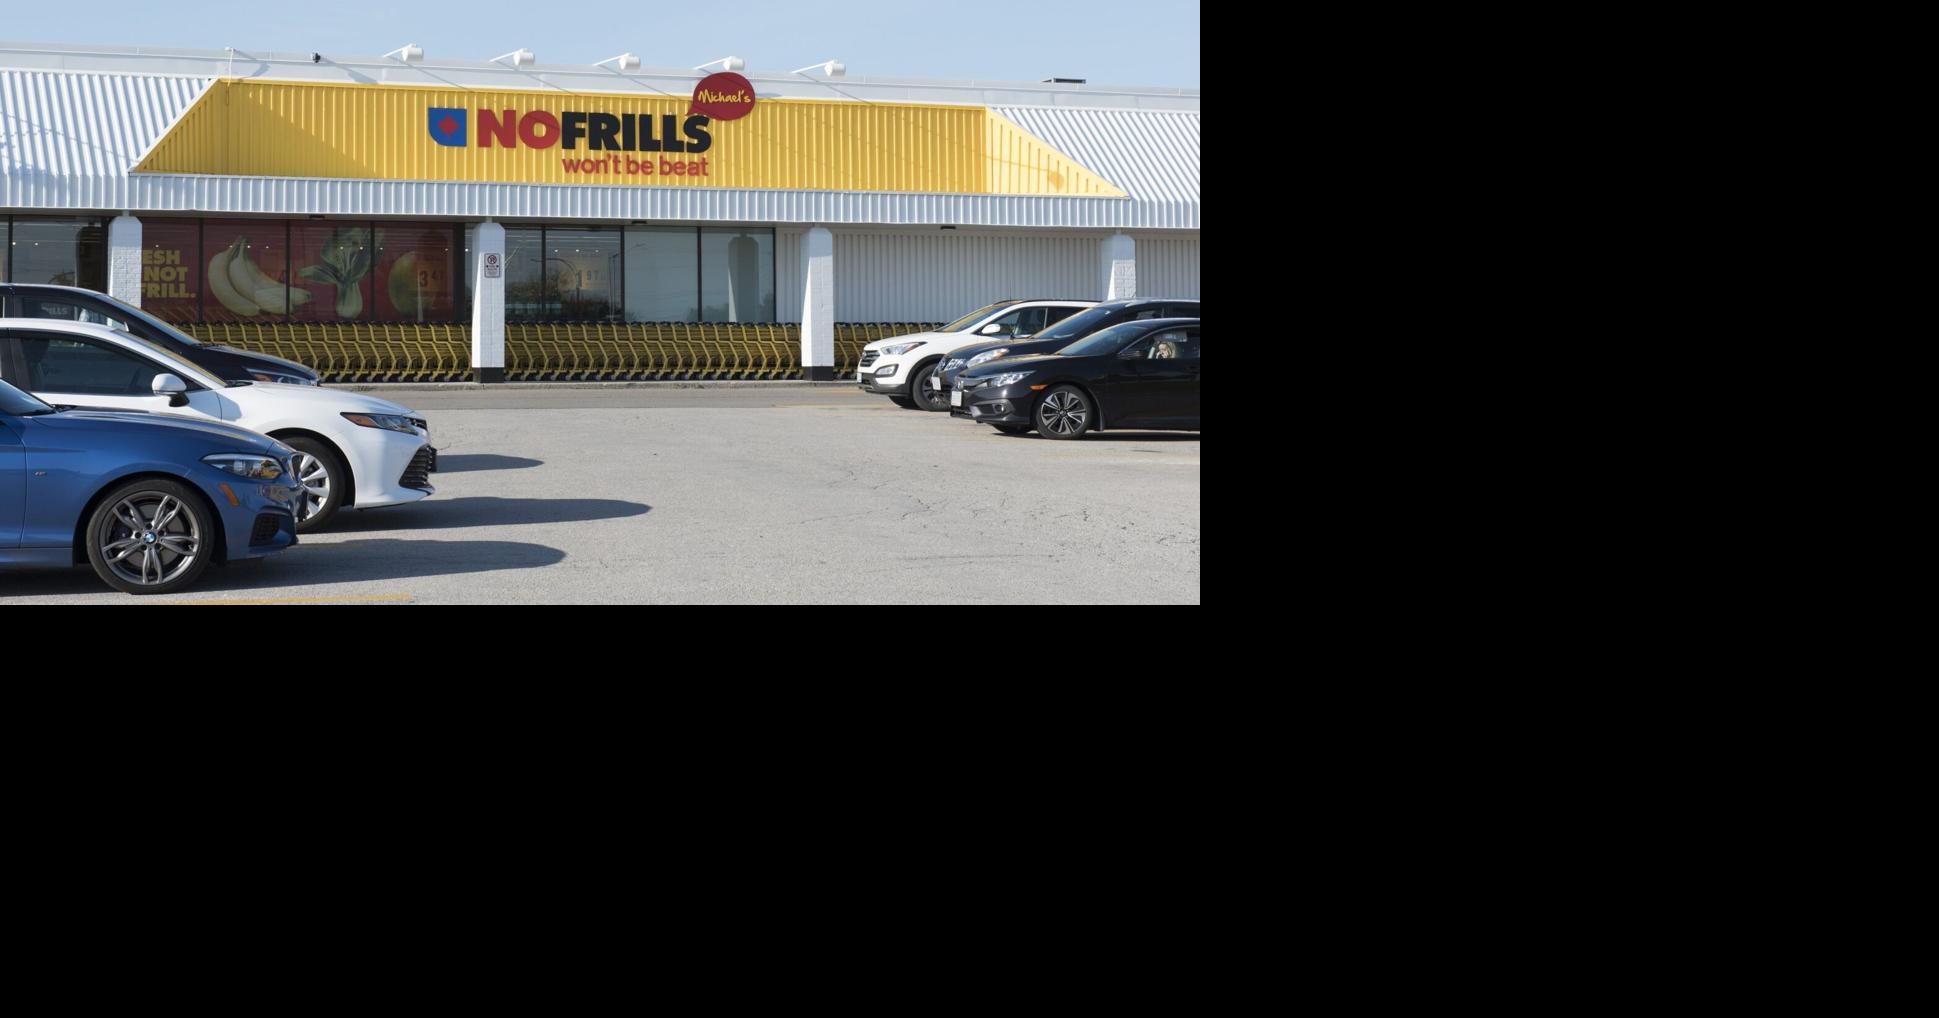 Toronto No Frills stores that would be impacted by strike